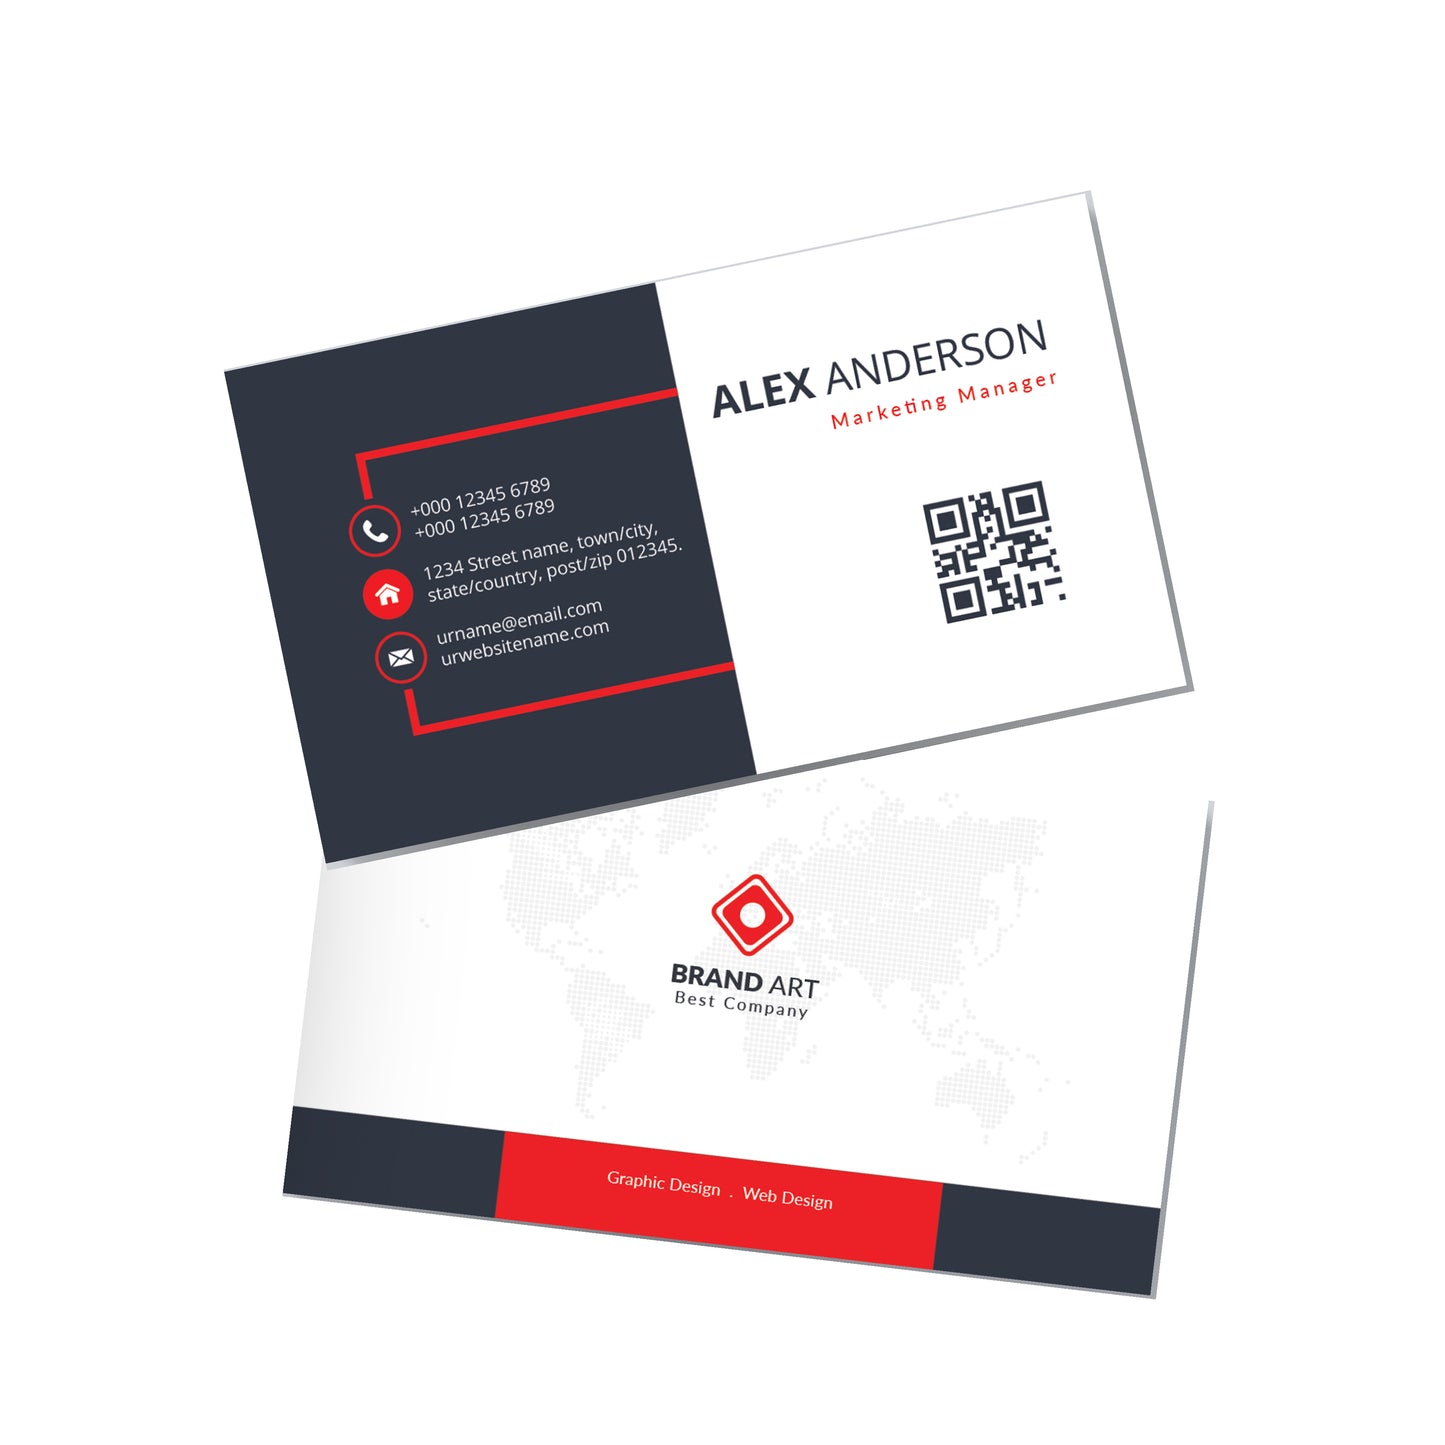 Red custom business cards, 500 pcs Business cards, real state business cards, personalized business cards, customized business cards